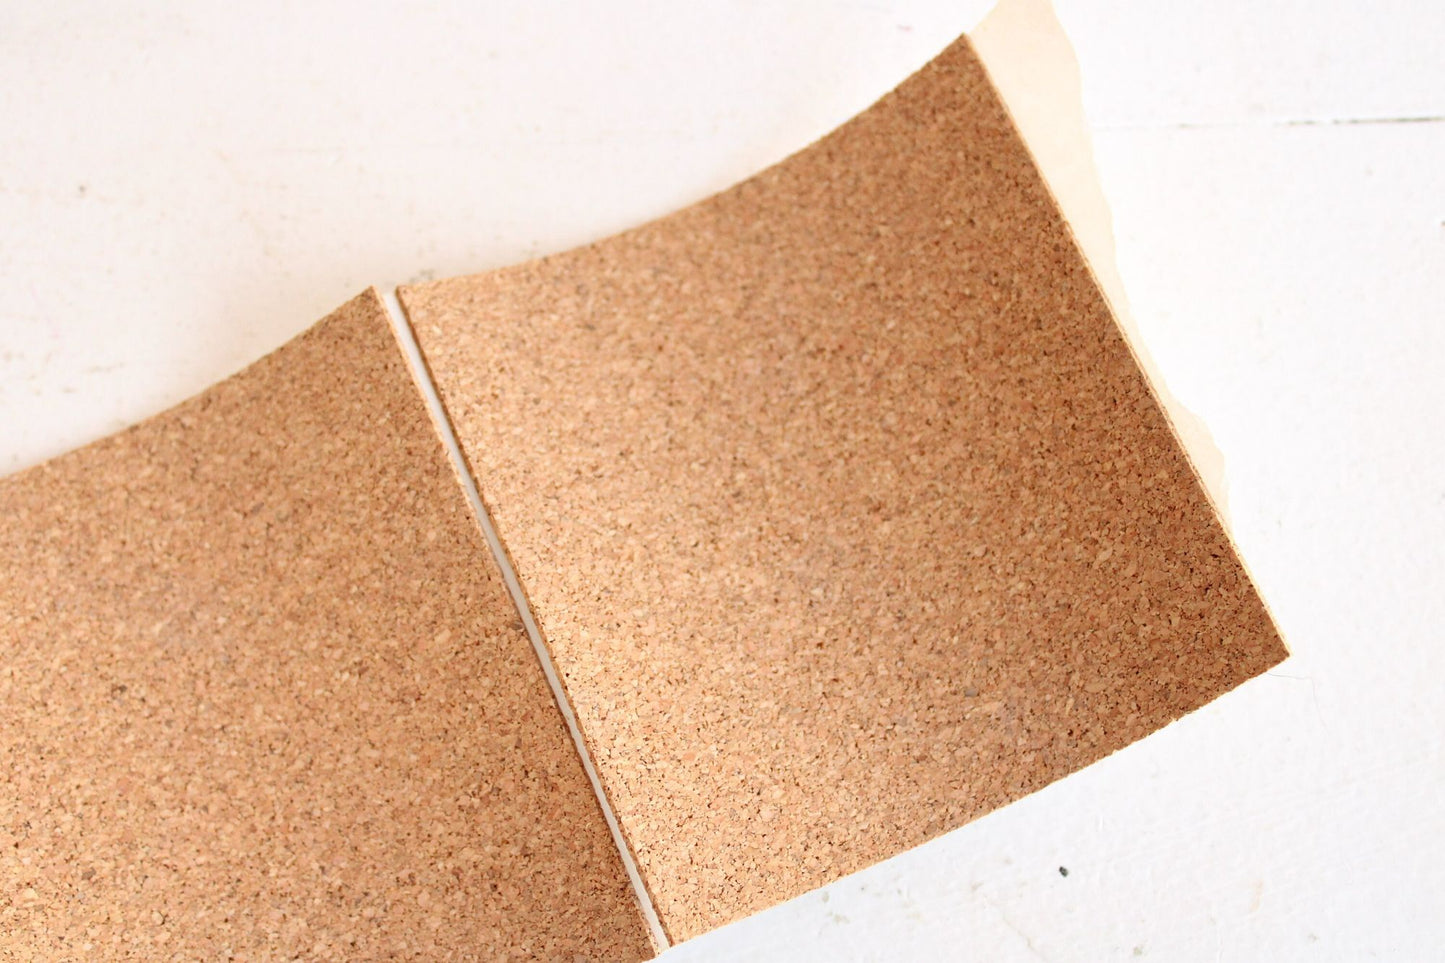 Cork Adhesive Backings for 4x4 Tiles or Coasters, Partial Roll, 41 Pieces